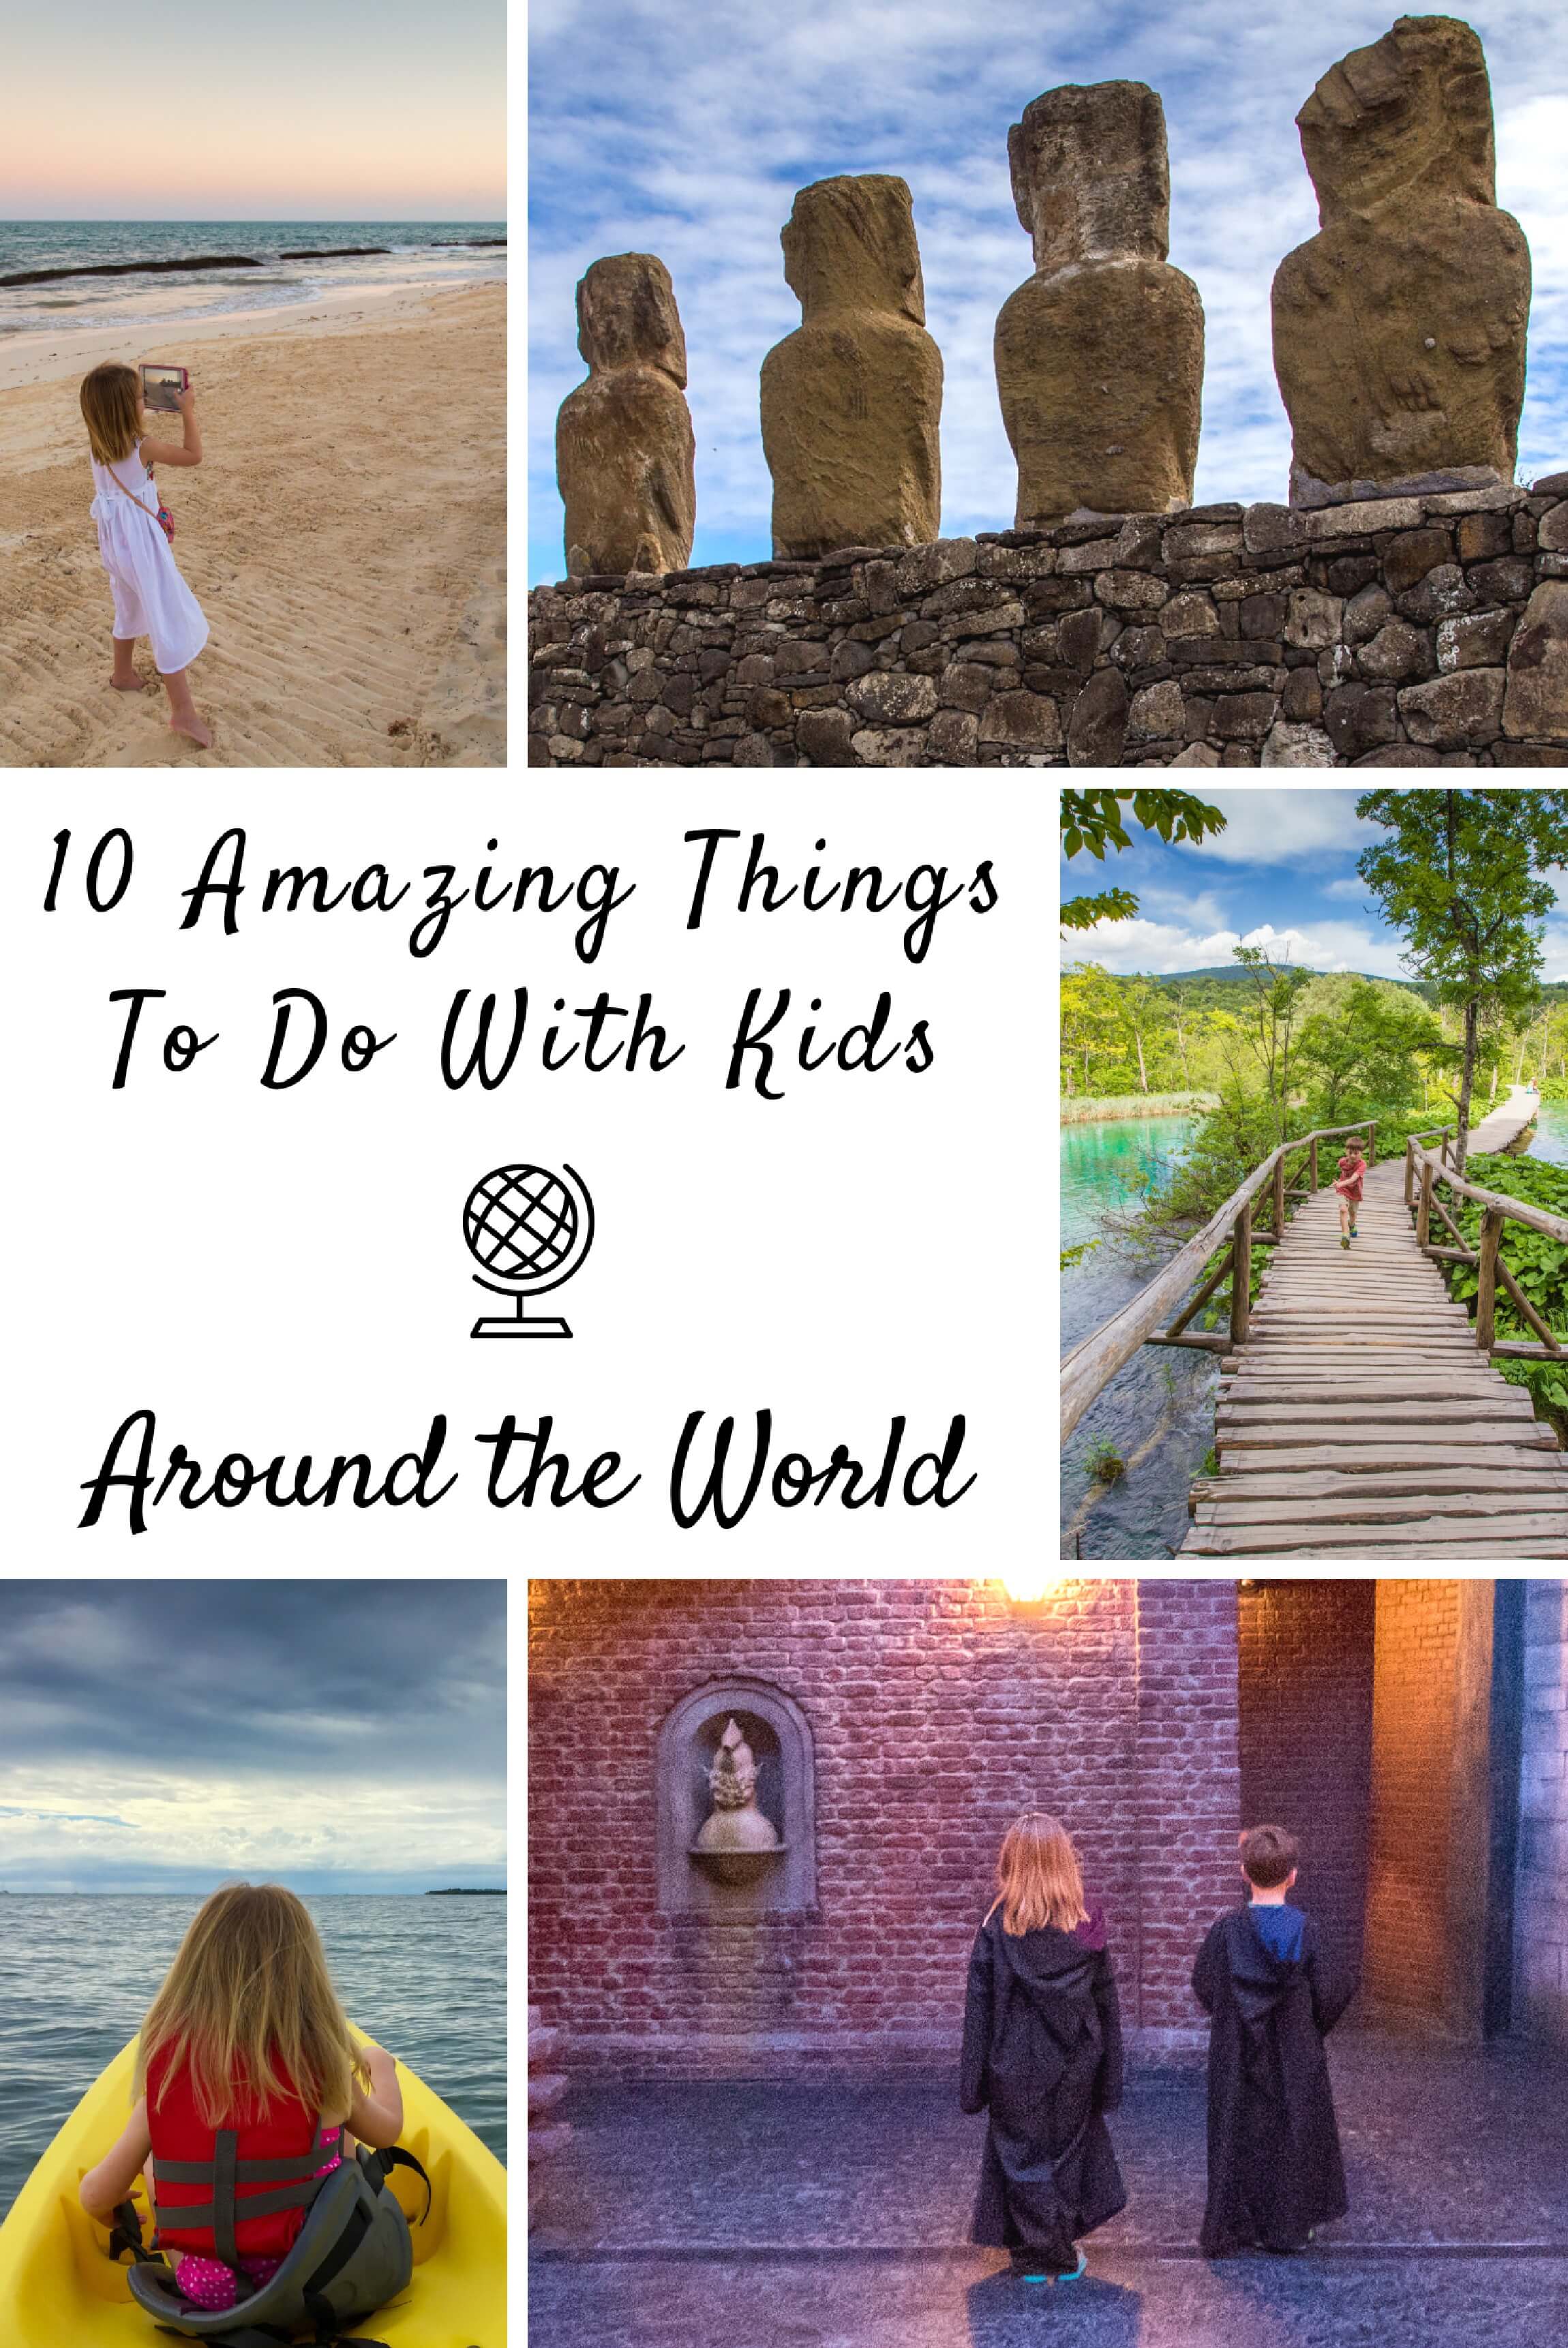 Ten Amazing Things to Do with Kids Around the World: These are my kids' top recommendations and favorite places around the world. Take your kids everywhere!